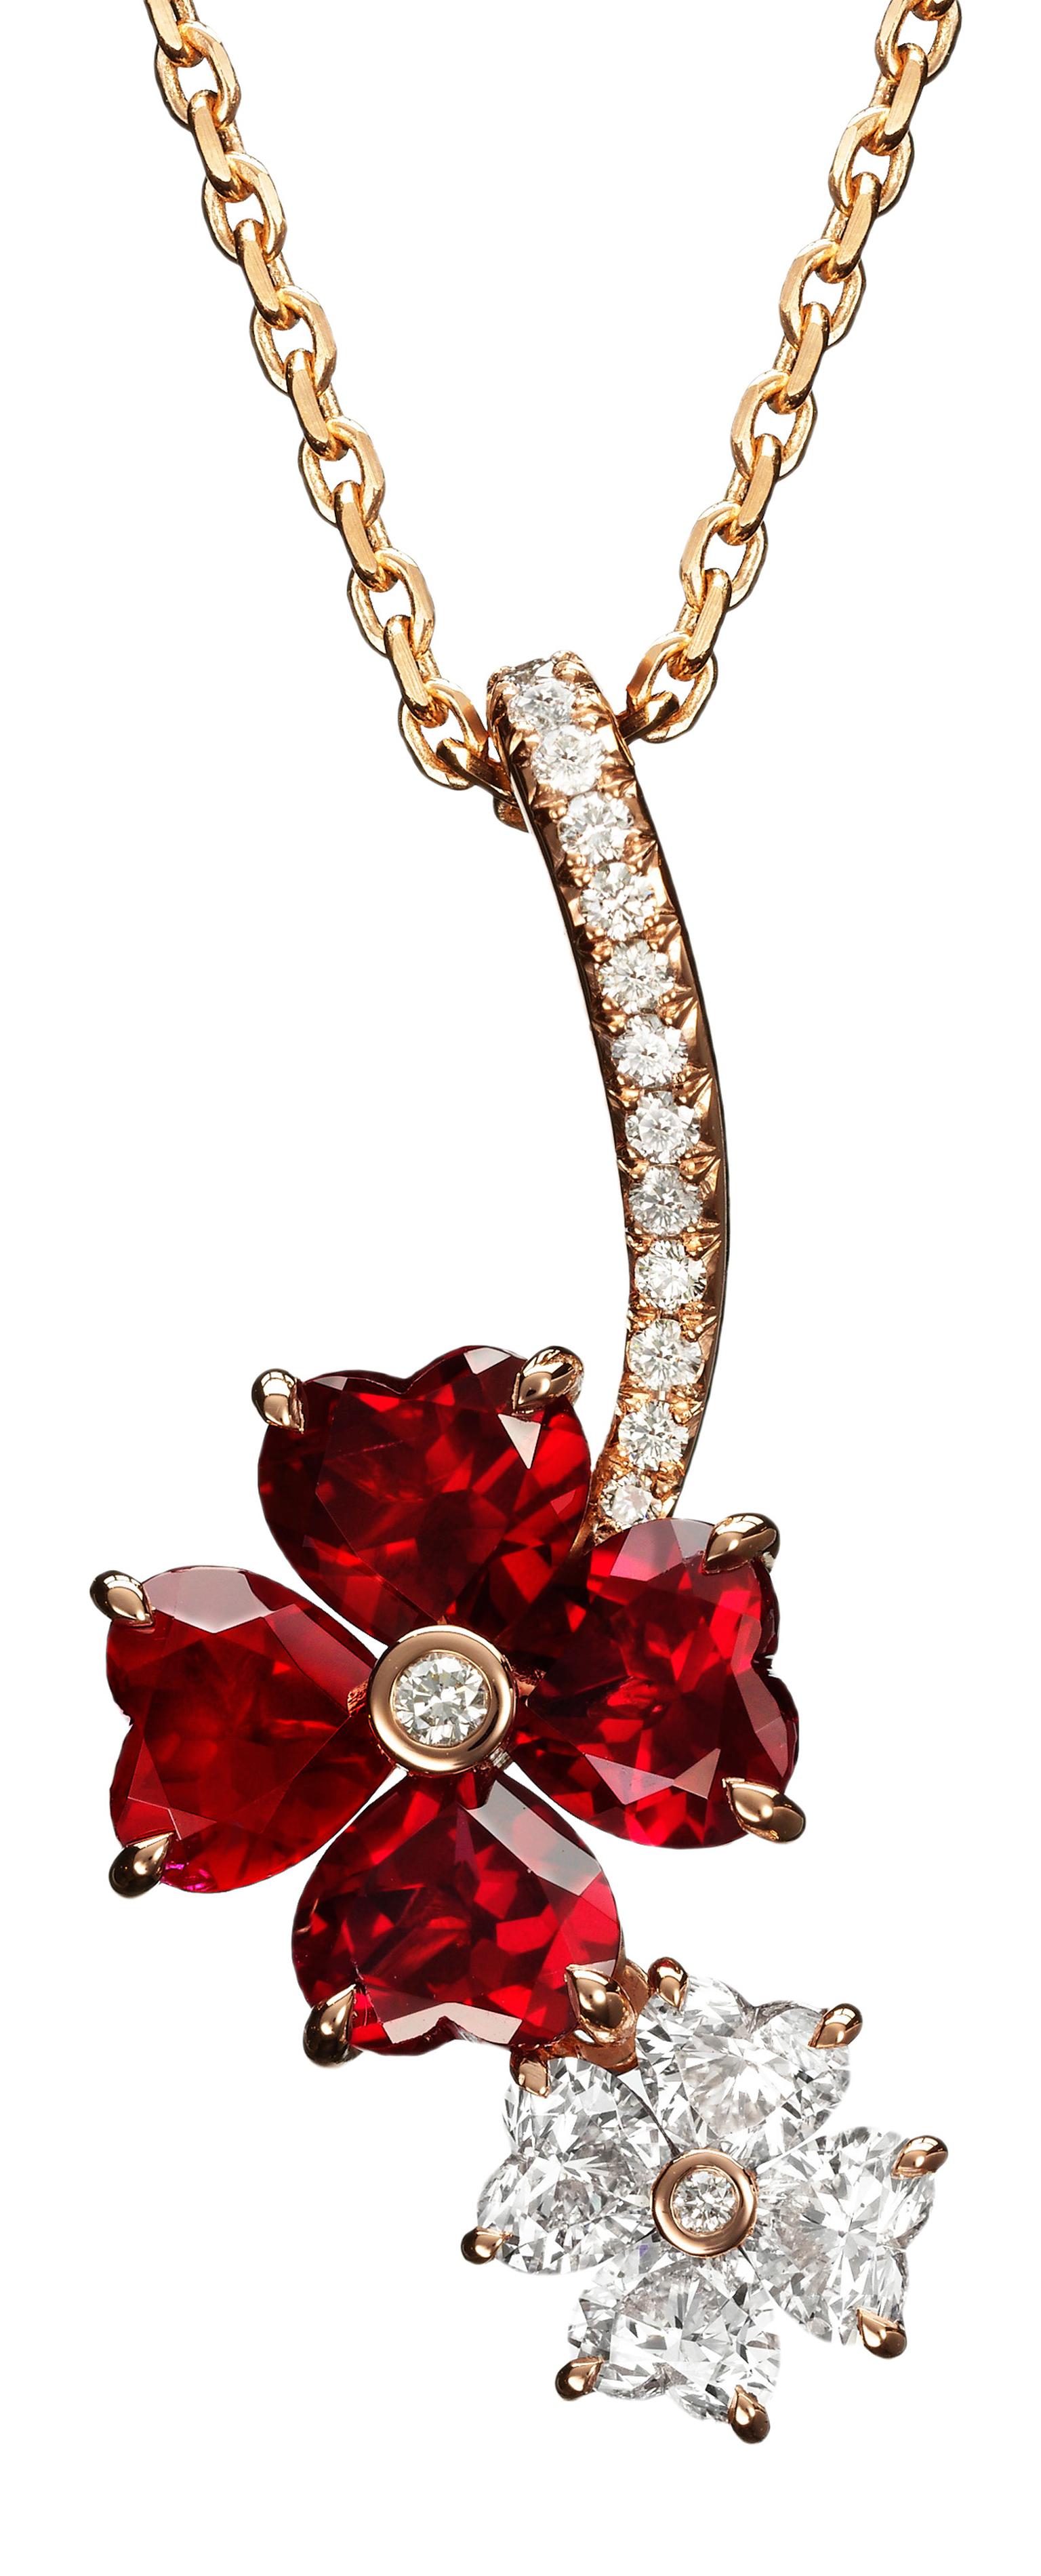 Chopard For You ruby necklace_20130606_Zoom